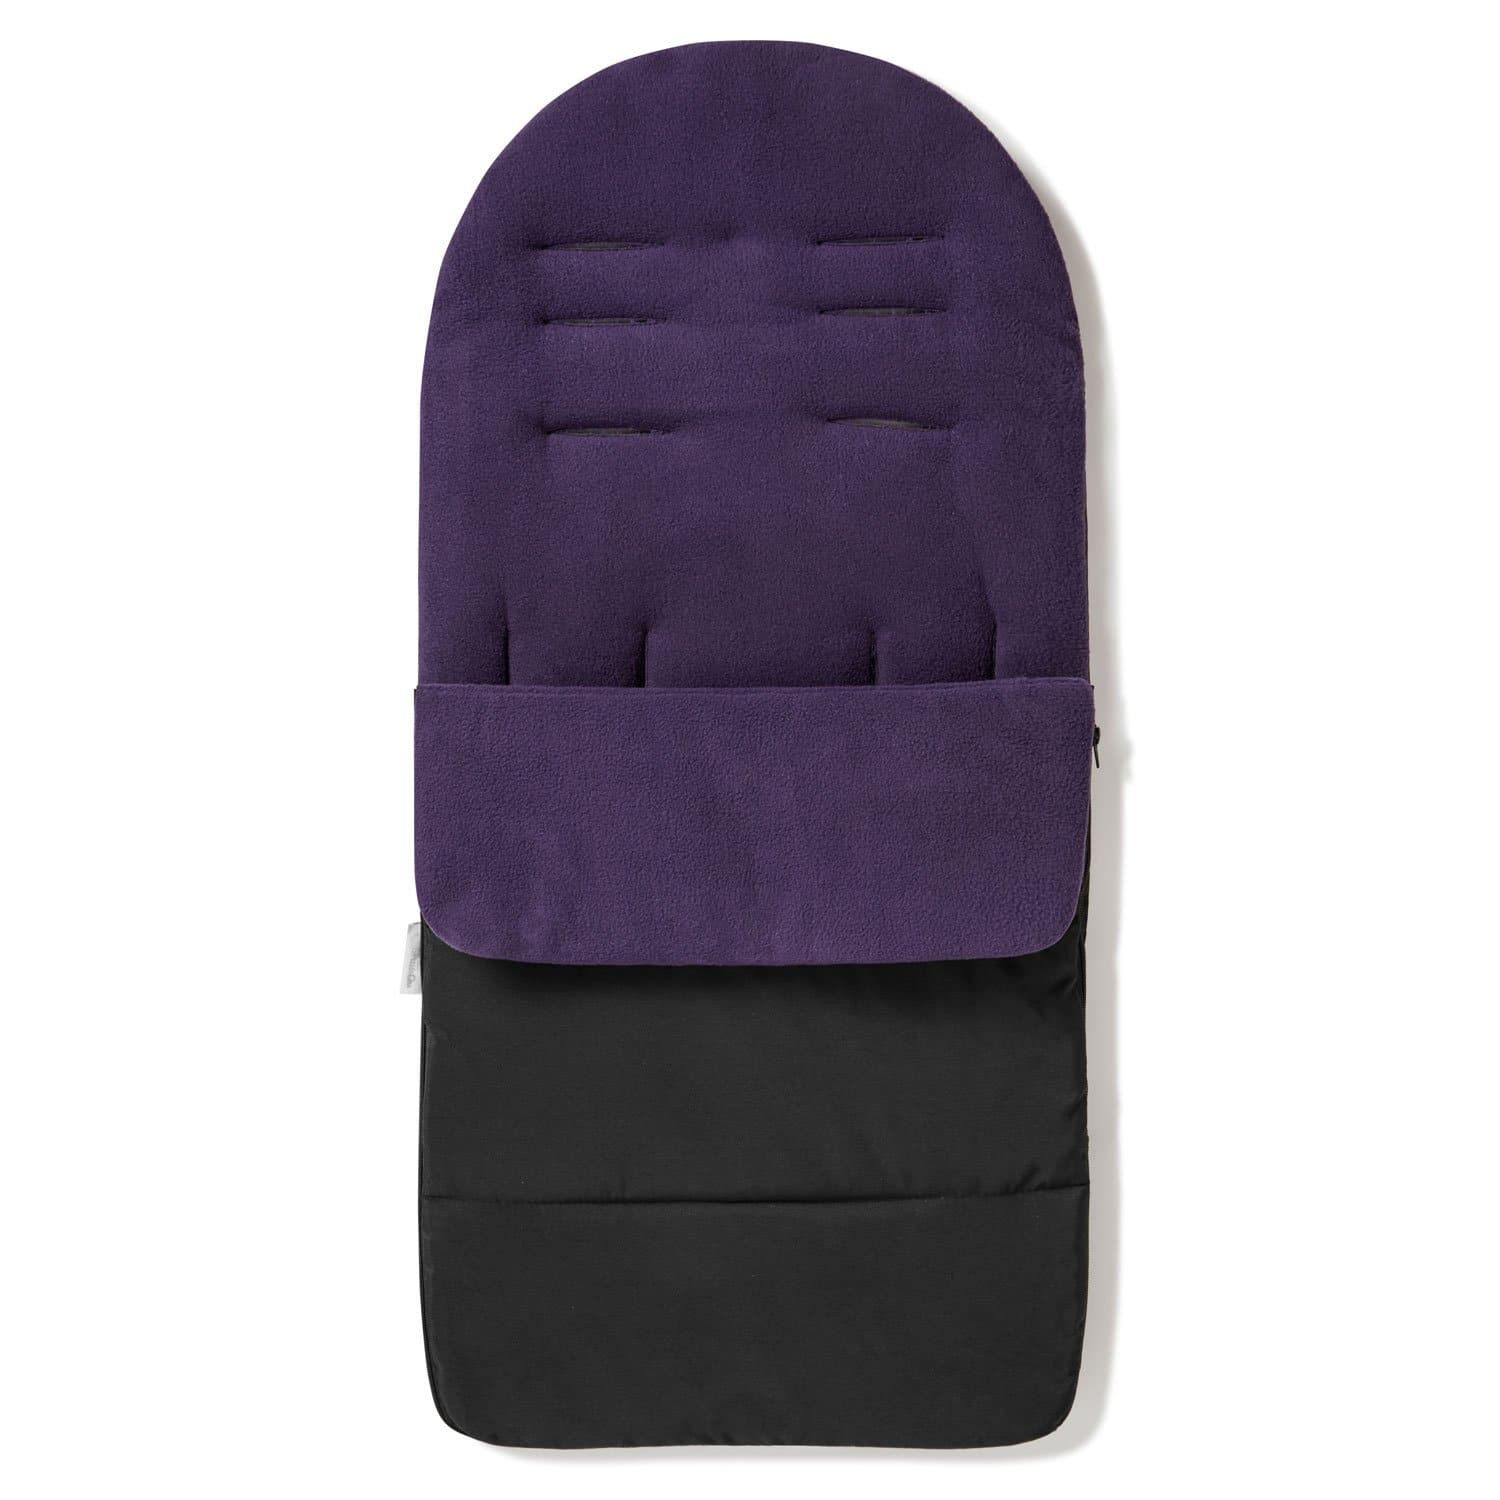 Premium Footmuff / Cosy Toes Compatible with Formula - Plum Purple / Fits All Models | For Your Little One